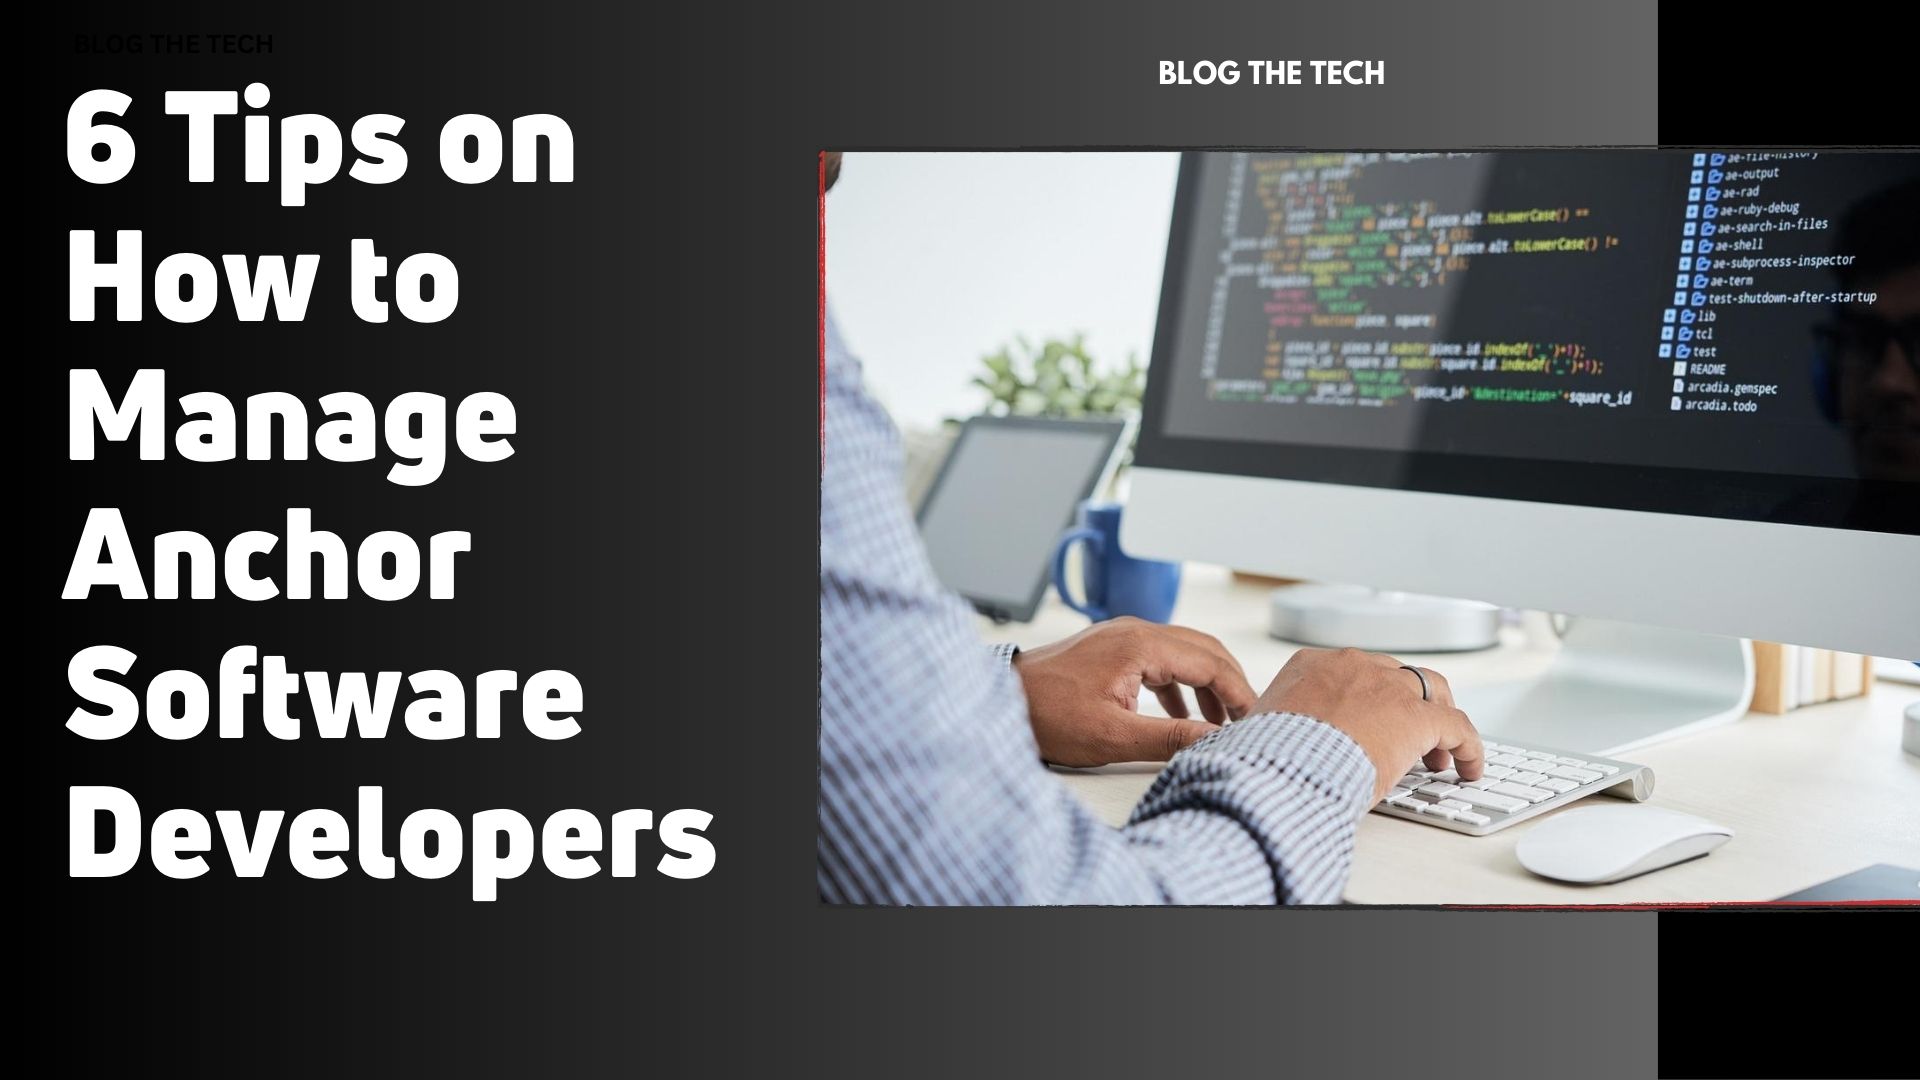 6 Tips on How to Manage Anchor Software Developers